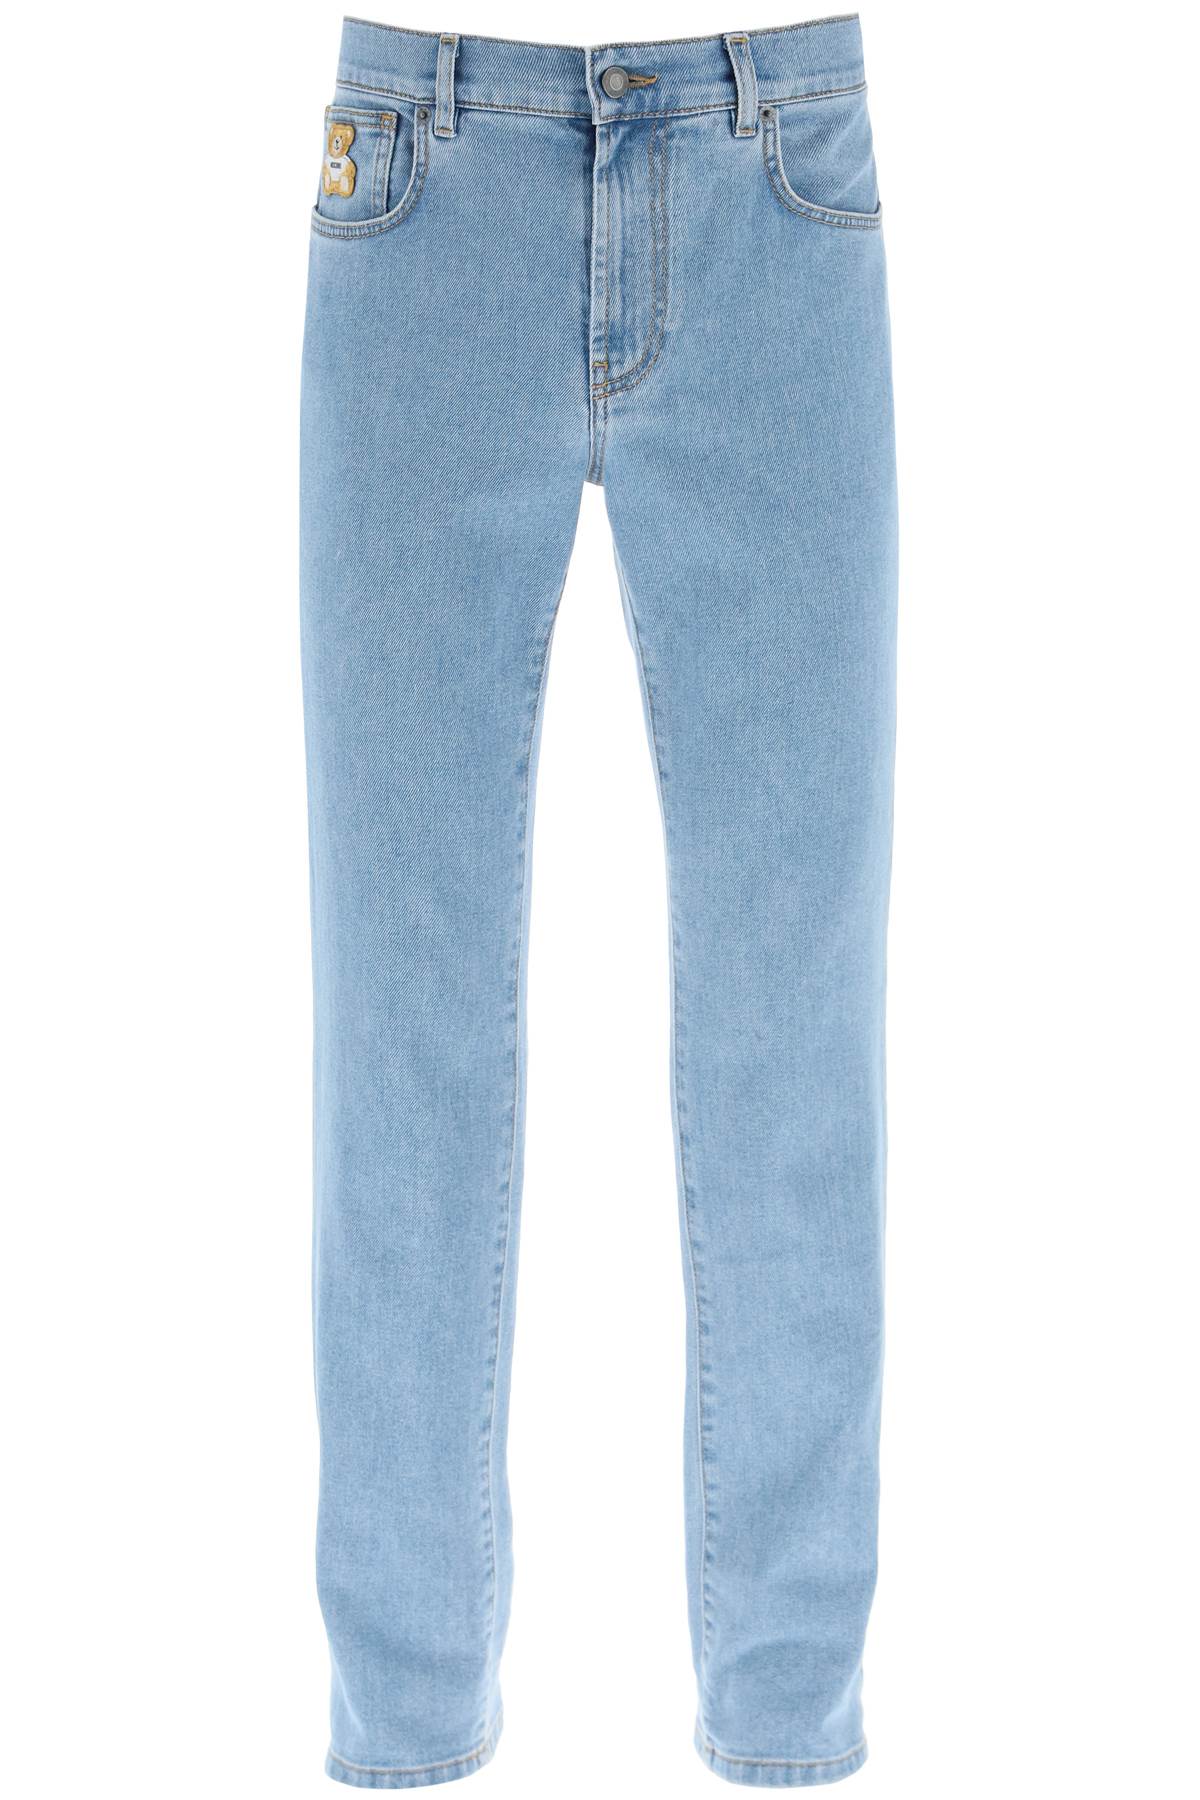 Moschino Teddy Jeans